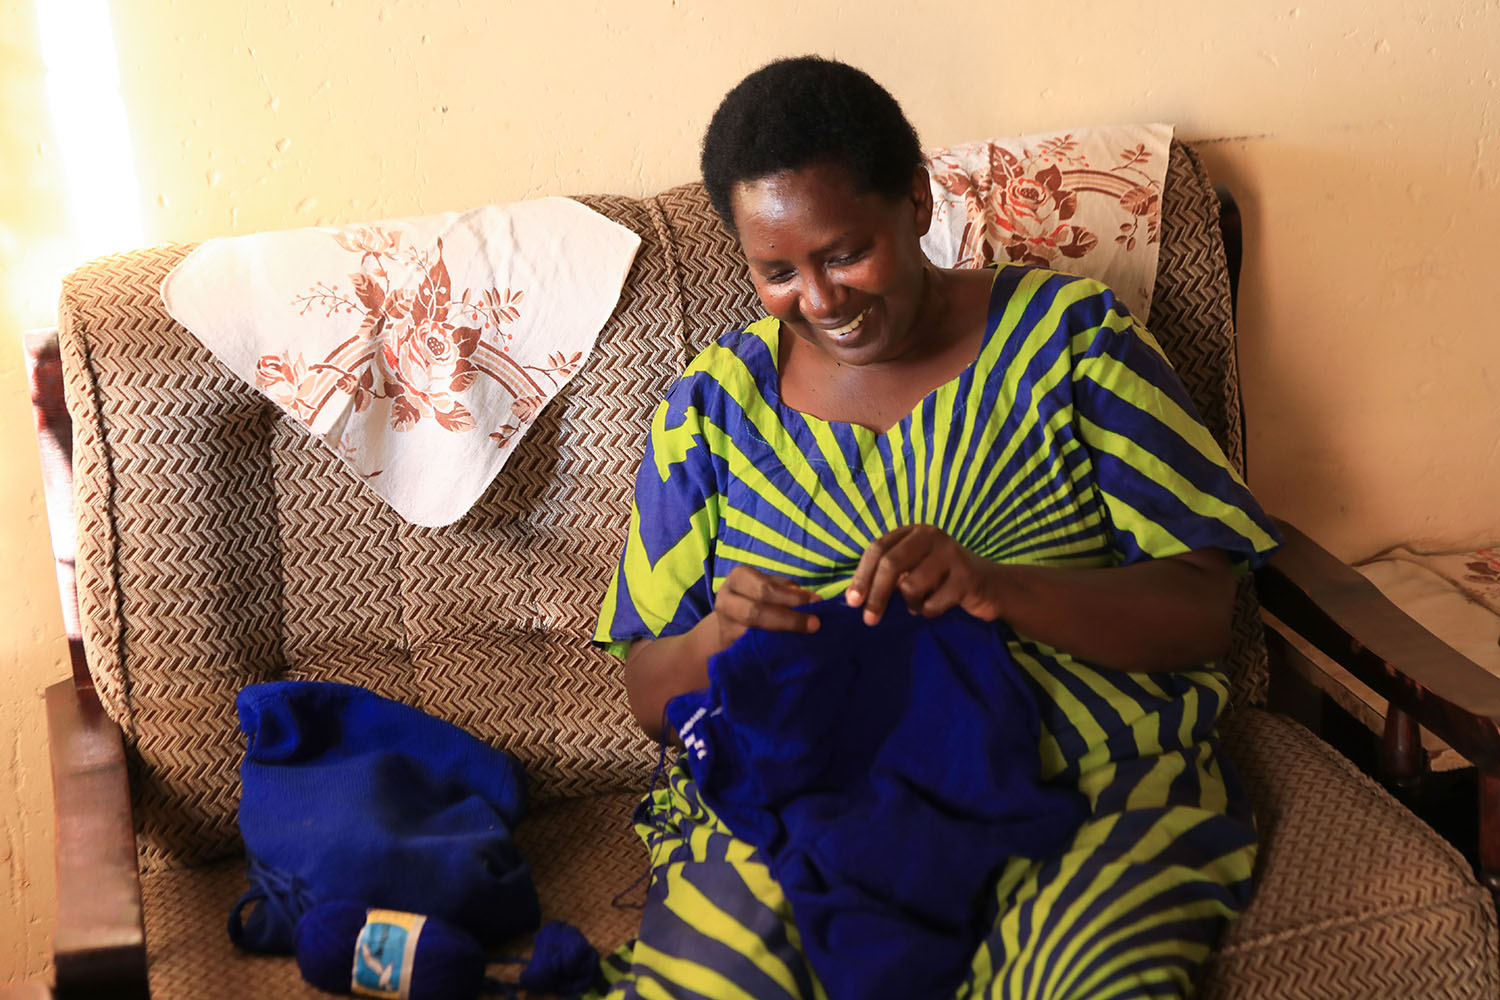 Patricia Nsabyimana relies on her sense of touch to make school sweaters. /Photos by Emmanuel Kwizera